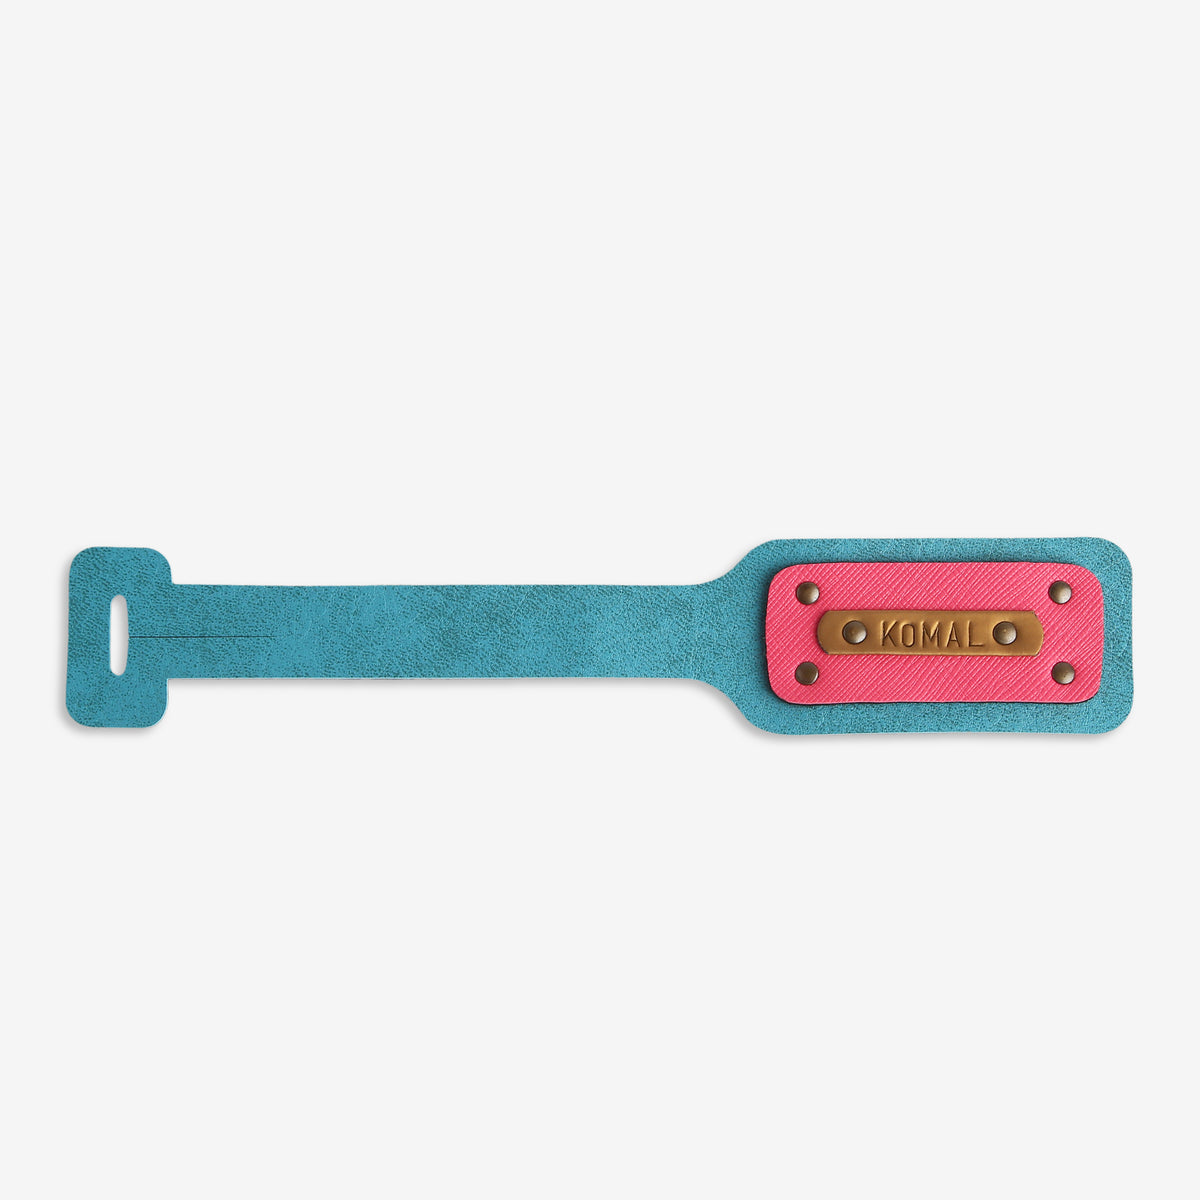 PERSONALISED LEATHER LUGGAGE/BAGGAGE TAG - LIGHT BLUE